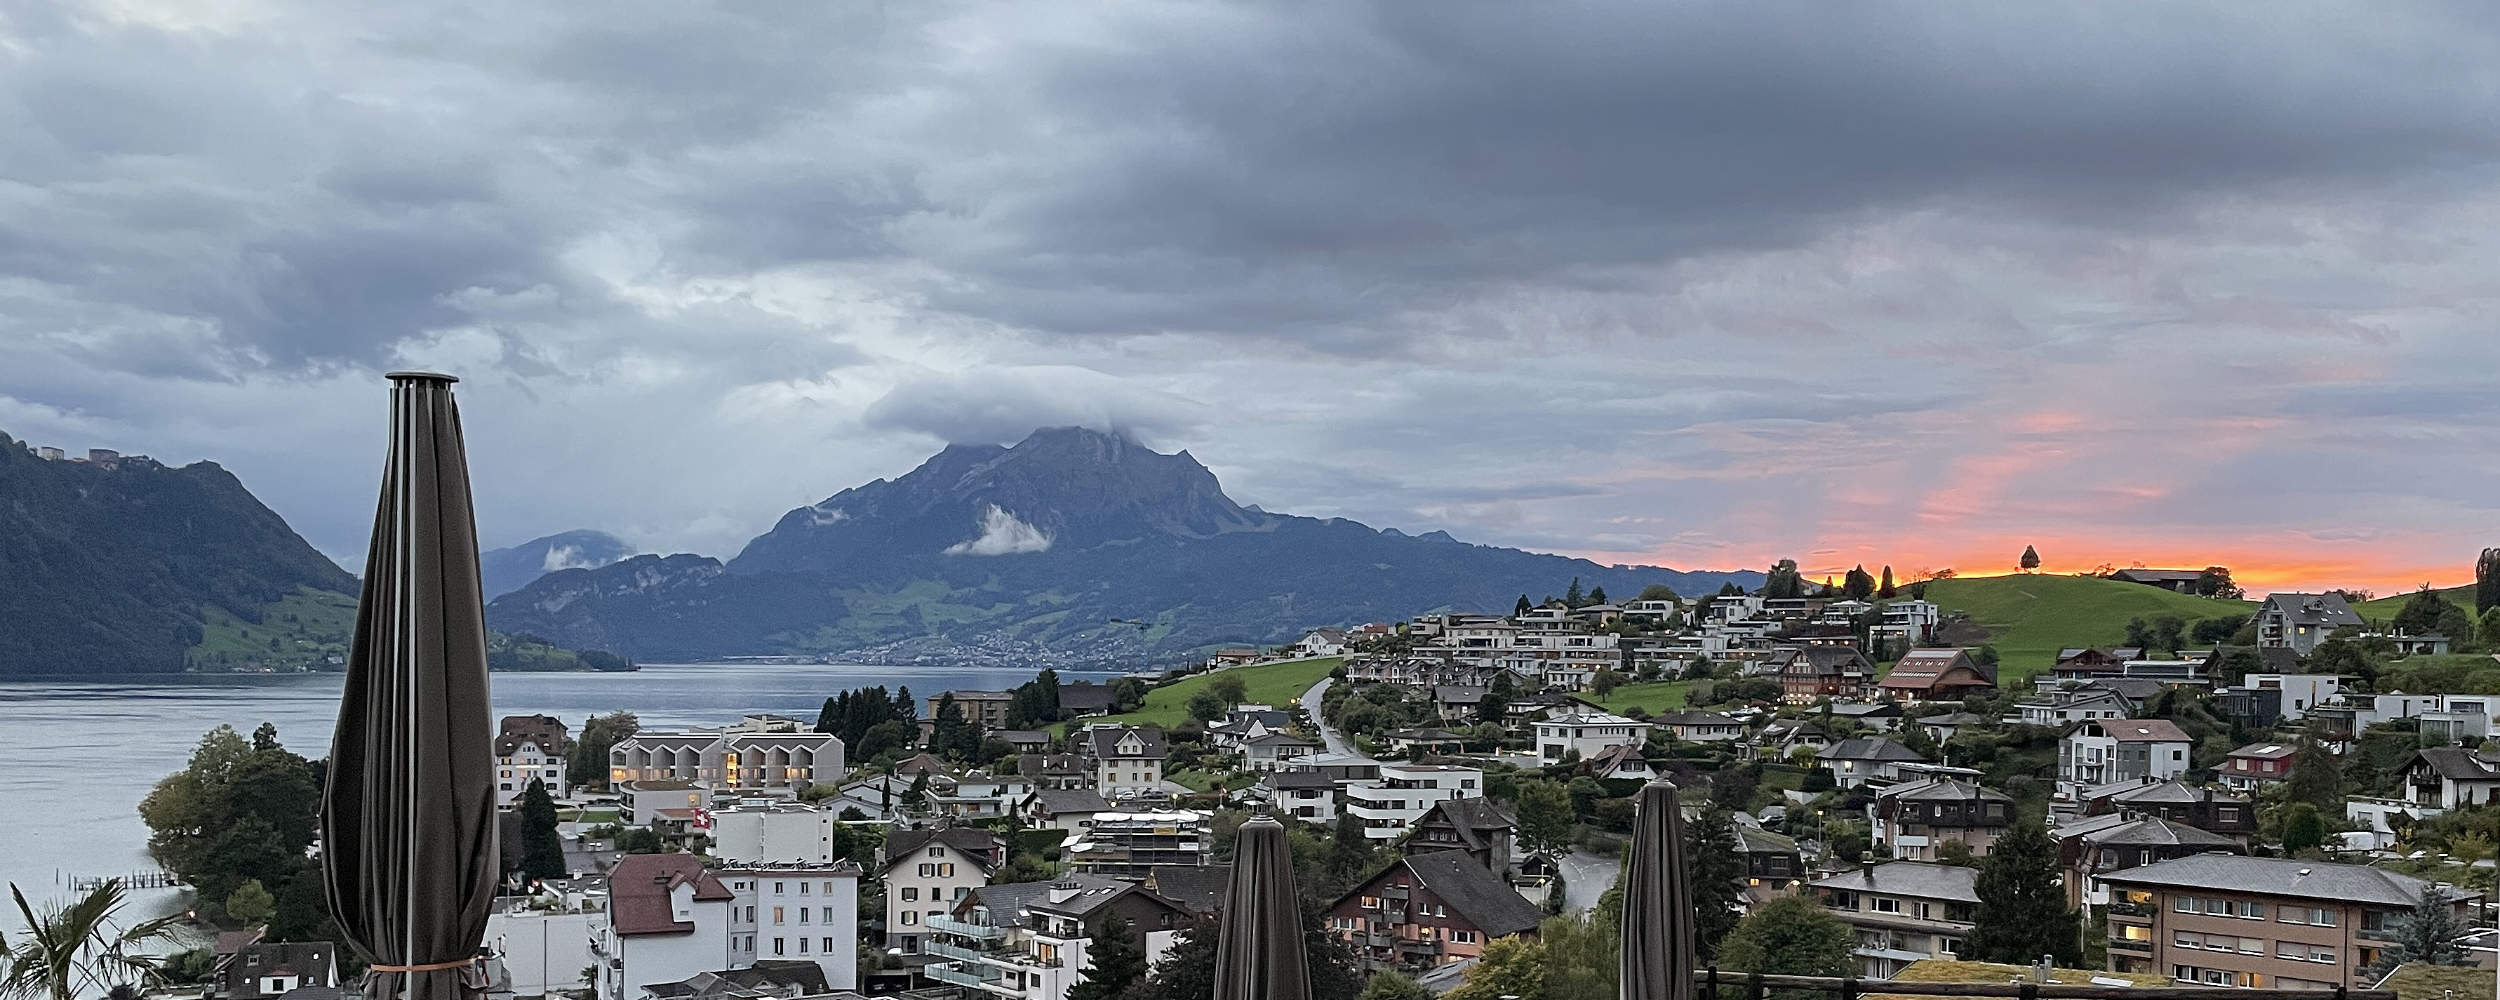 Visiting Switzerland - lakes, mountains and a glow on the horizon